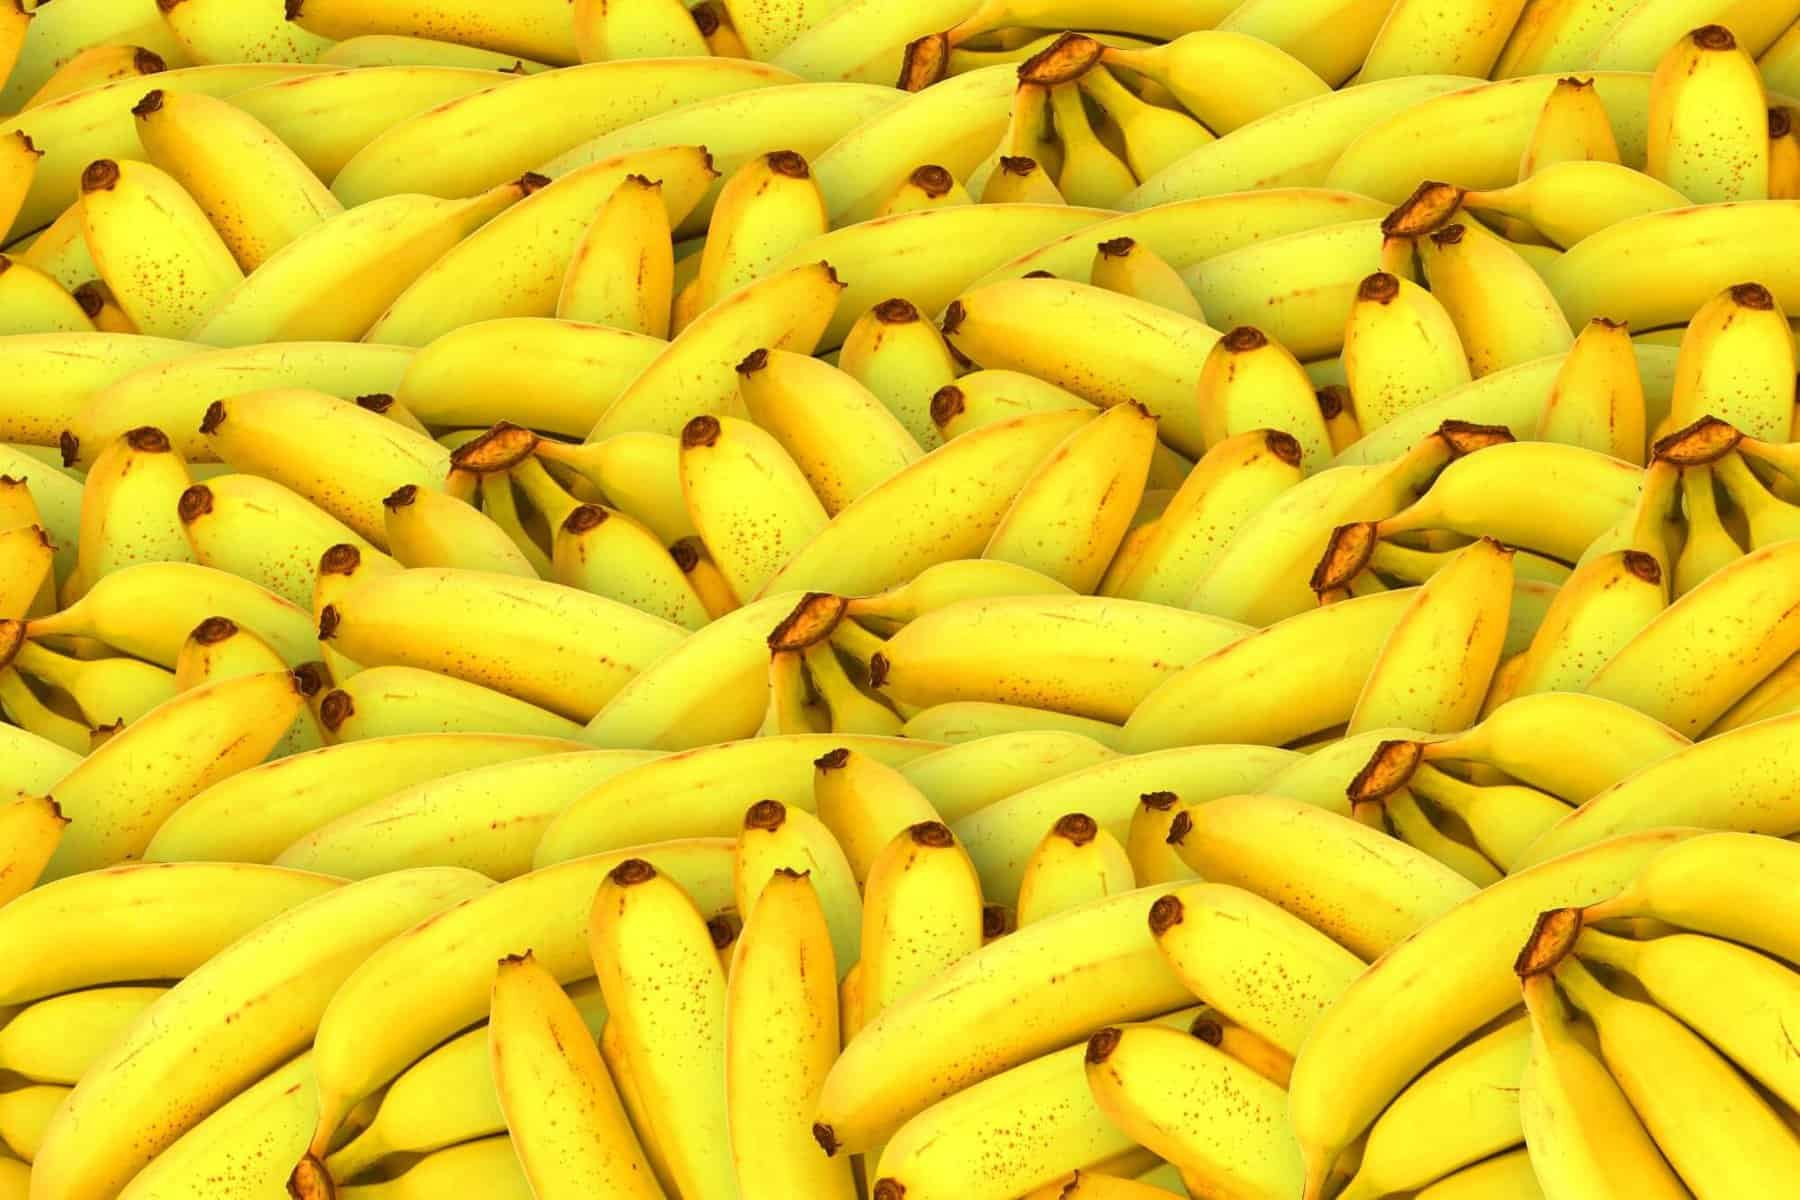 12 Reasons to Add Bananas to Your Daily Diet